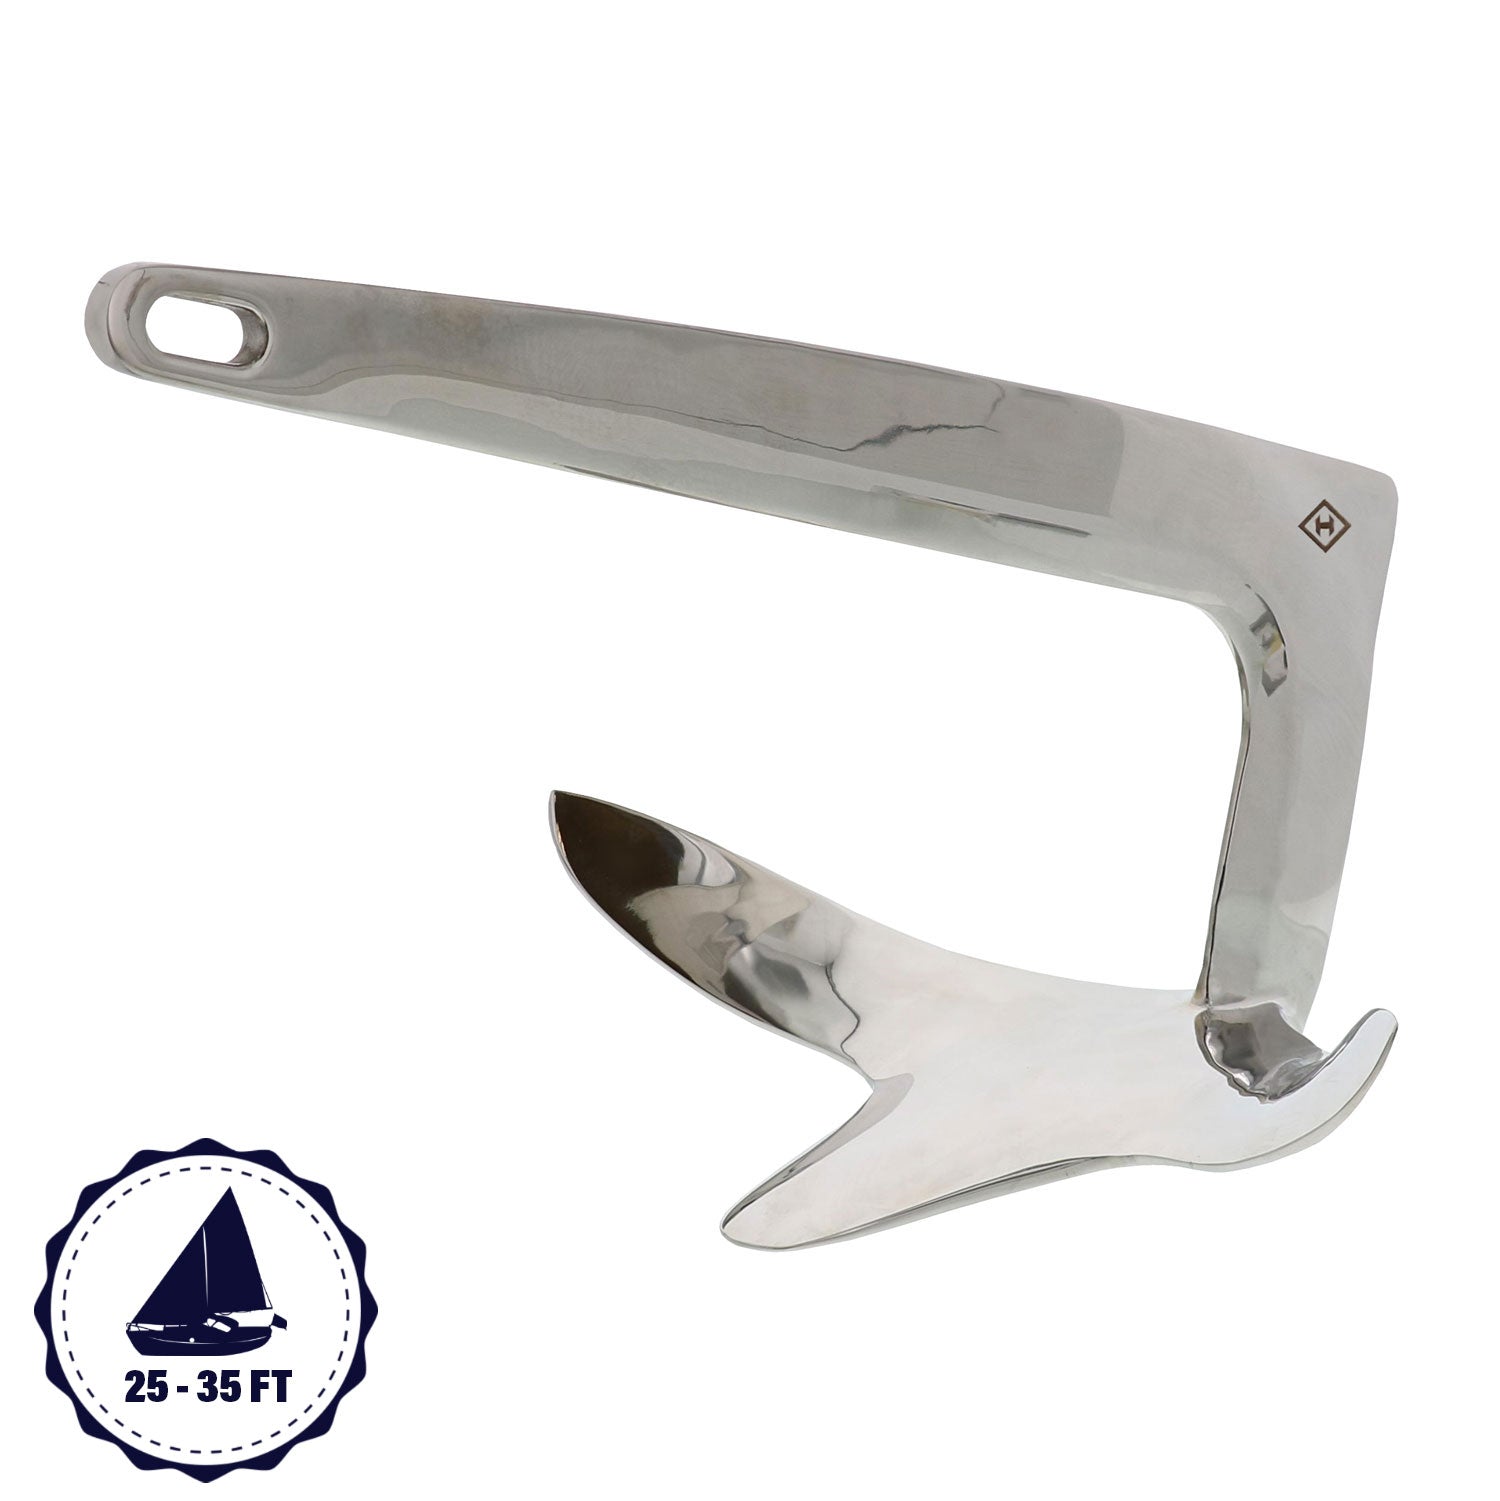 22 lbs Stainless Steel Bruce Anchor